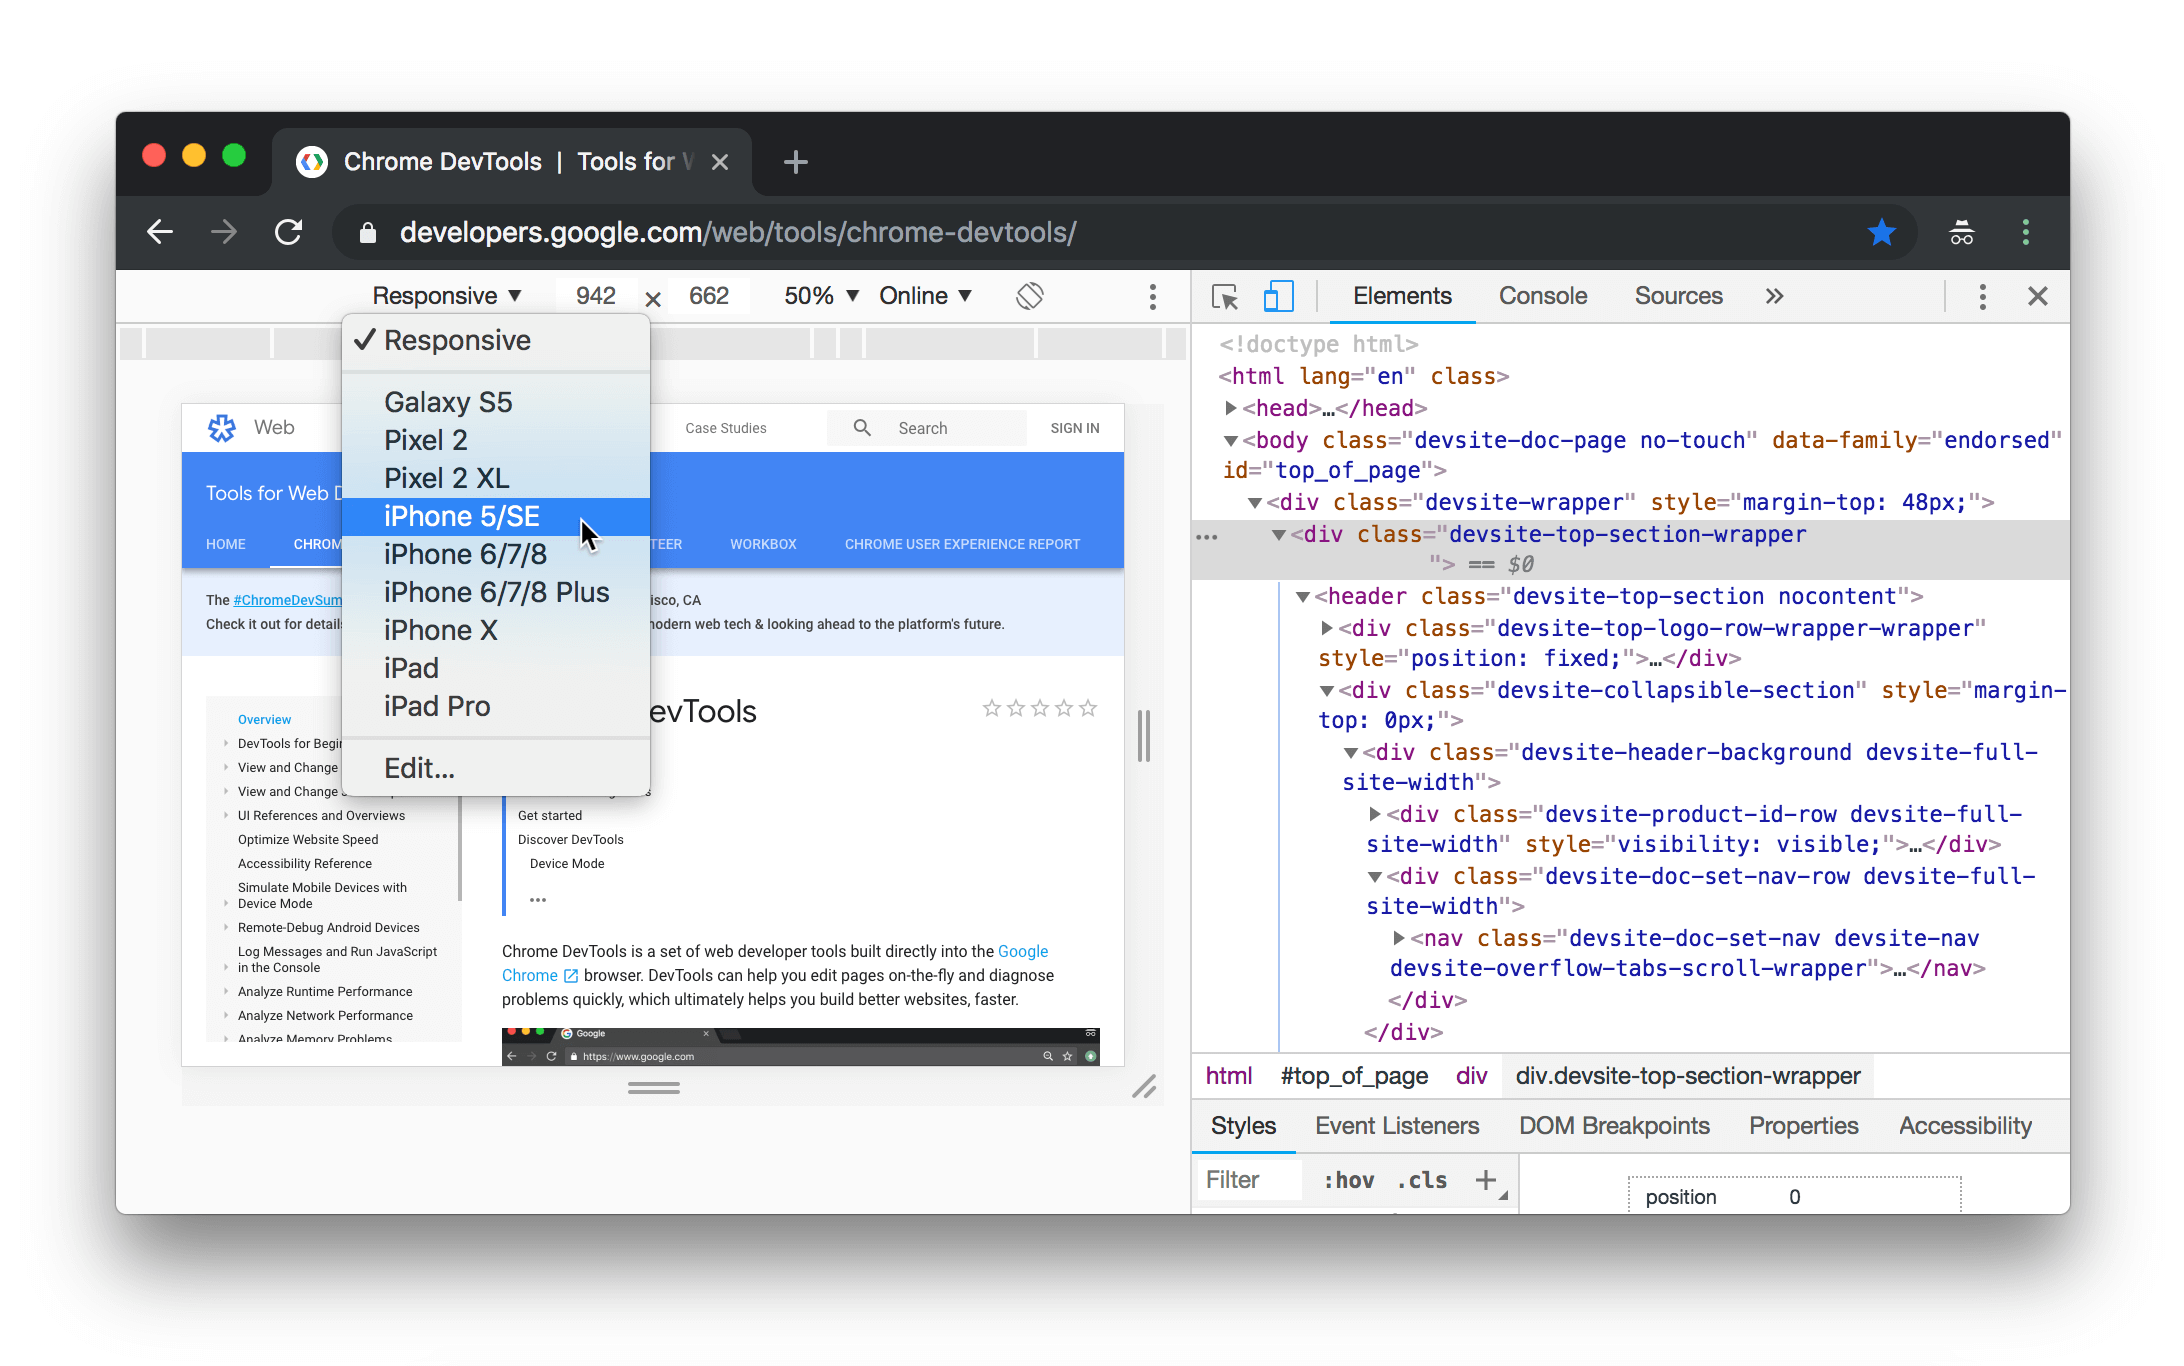 Available devices in Chrome Dev Tools